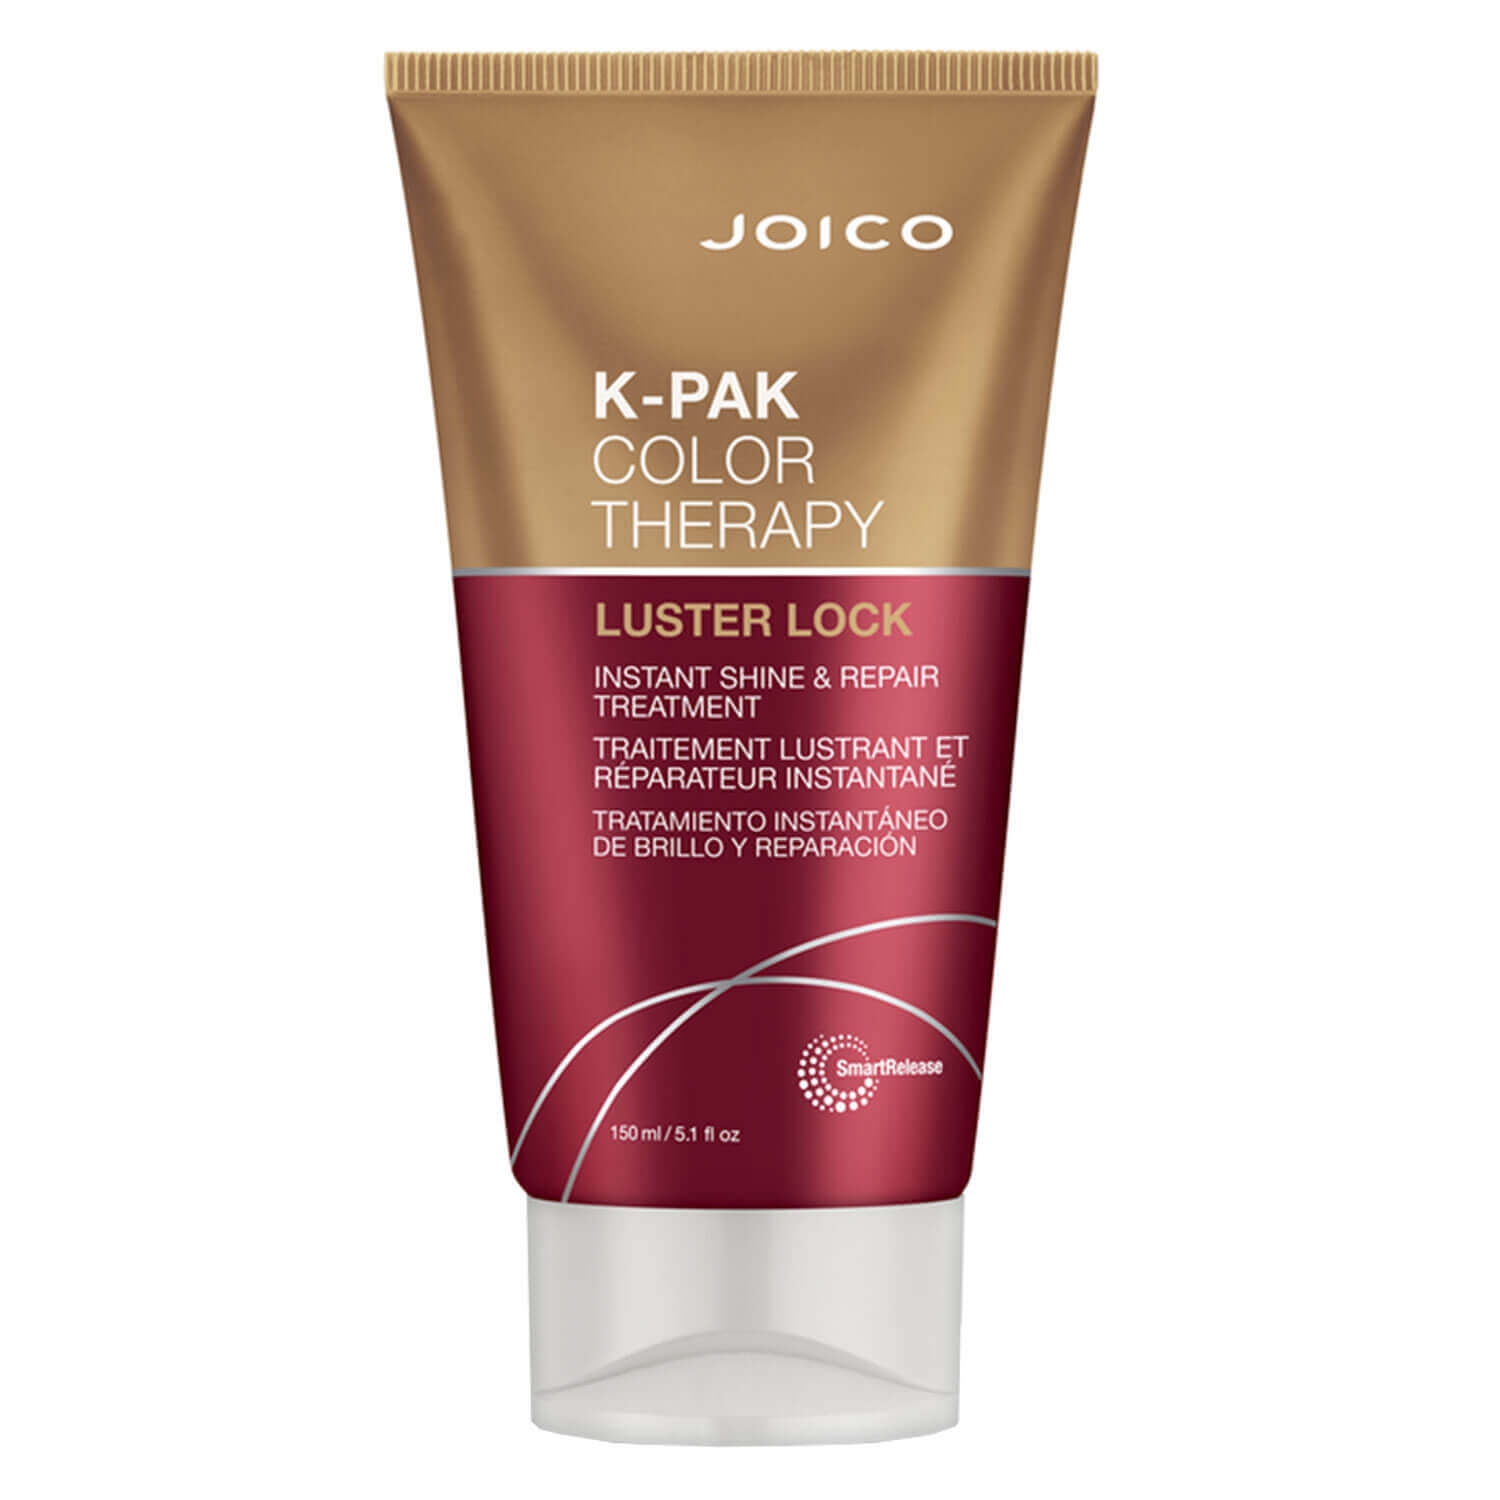 Product image from K-Pak - Color Therapy Luster Lock Instant Shine & Repair Treatment